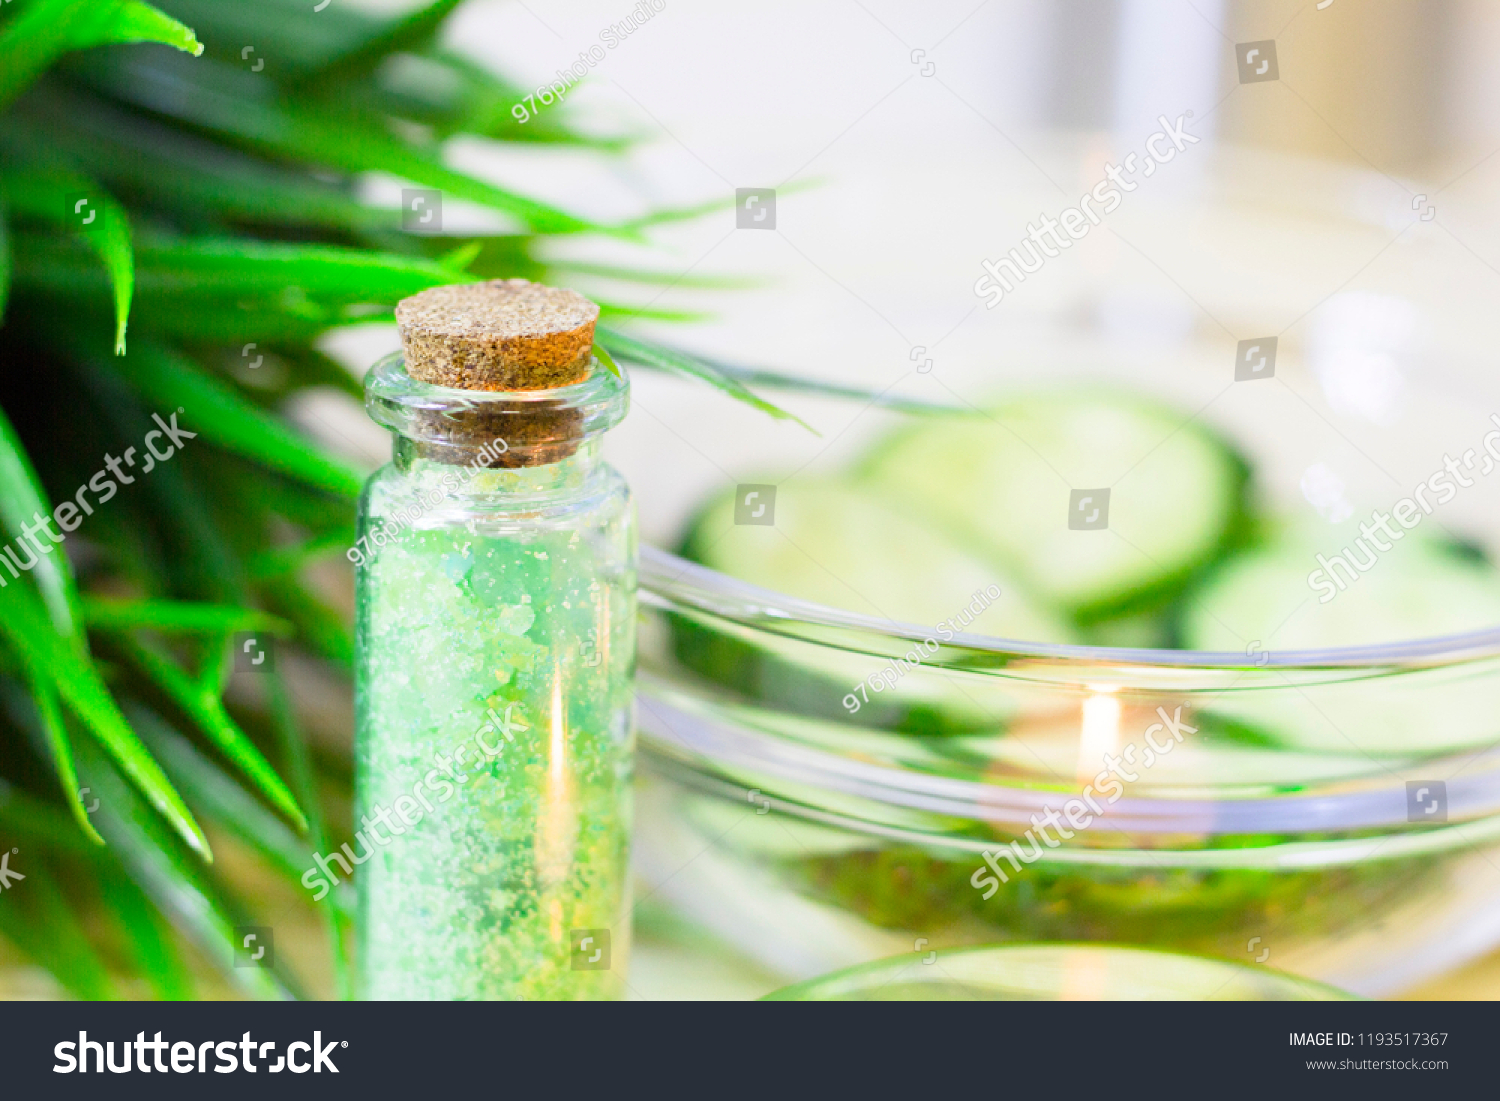 Cucumber home spa and hair care concept. Sliced cucumber, bottles of oil, bathroom towel. Straw light background. Closeup #1193517367